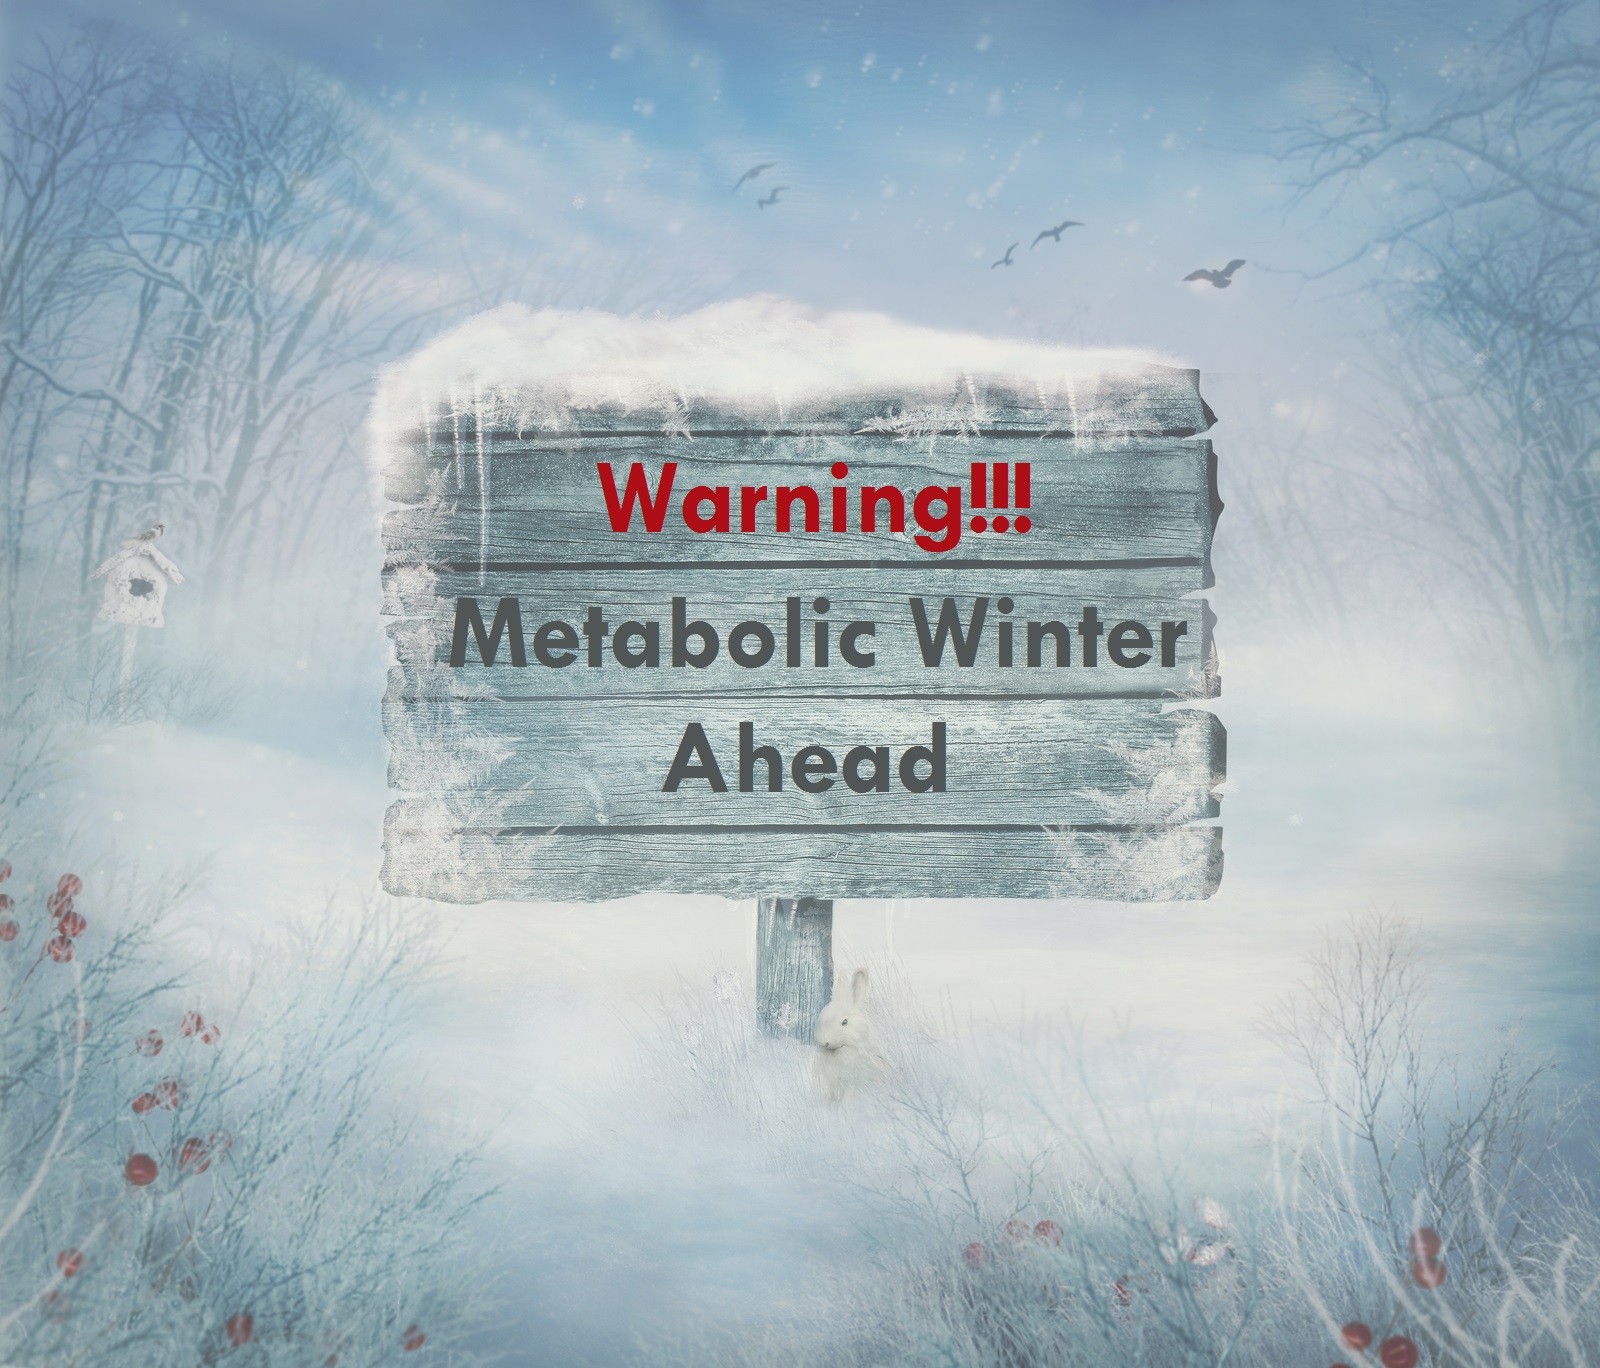 [MUST READ] The “Metabolic Winter” Hypothesis…